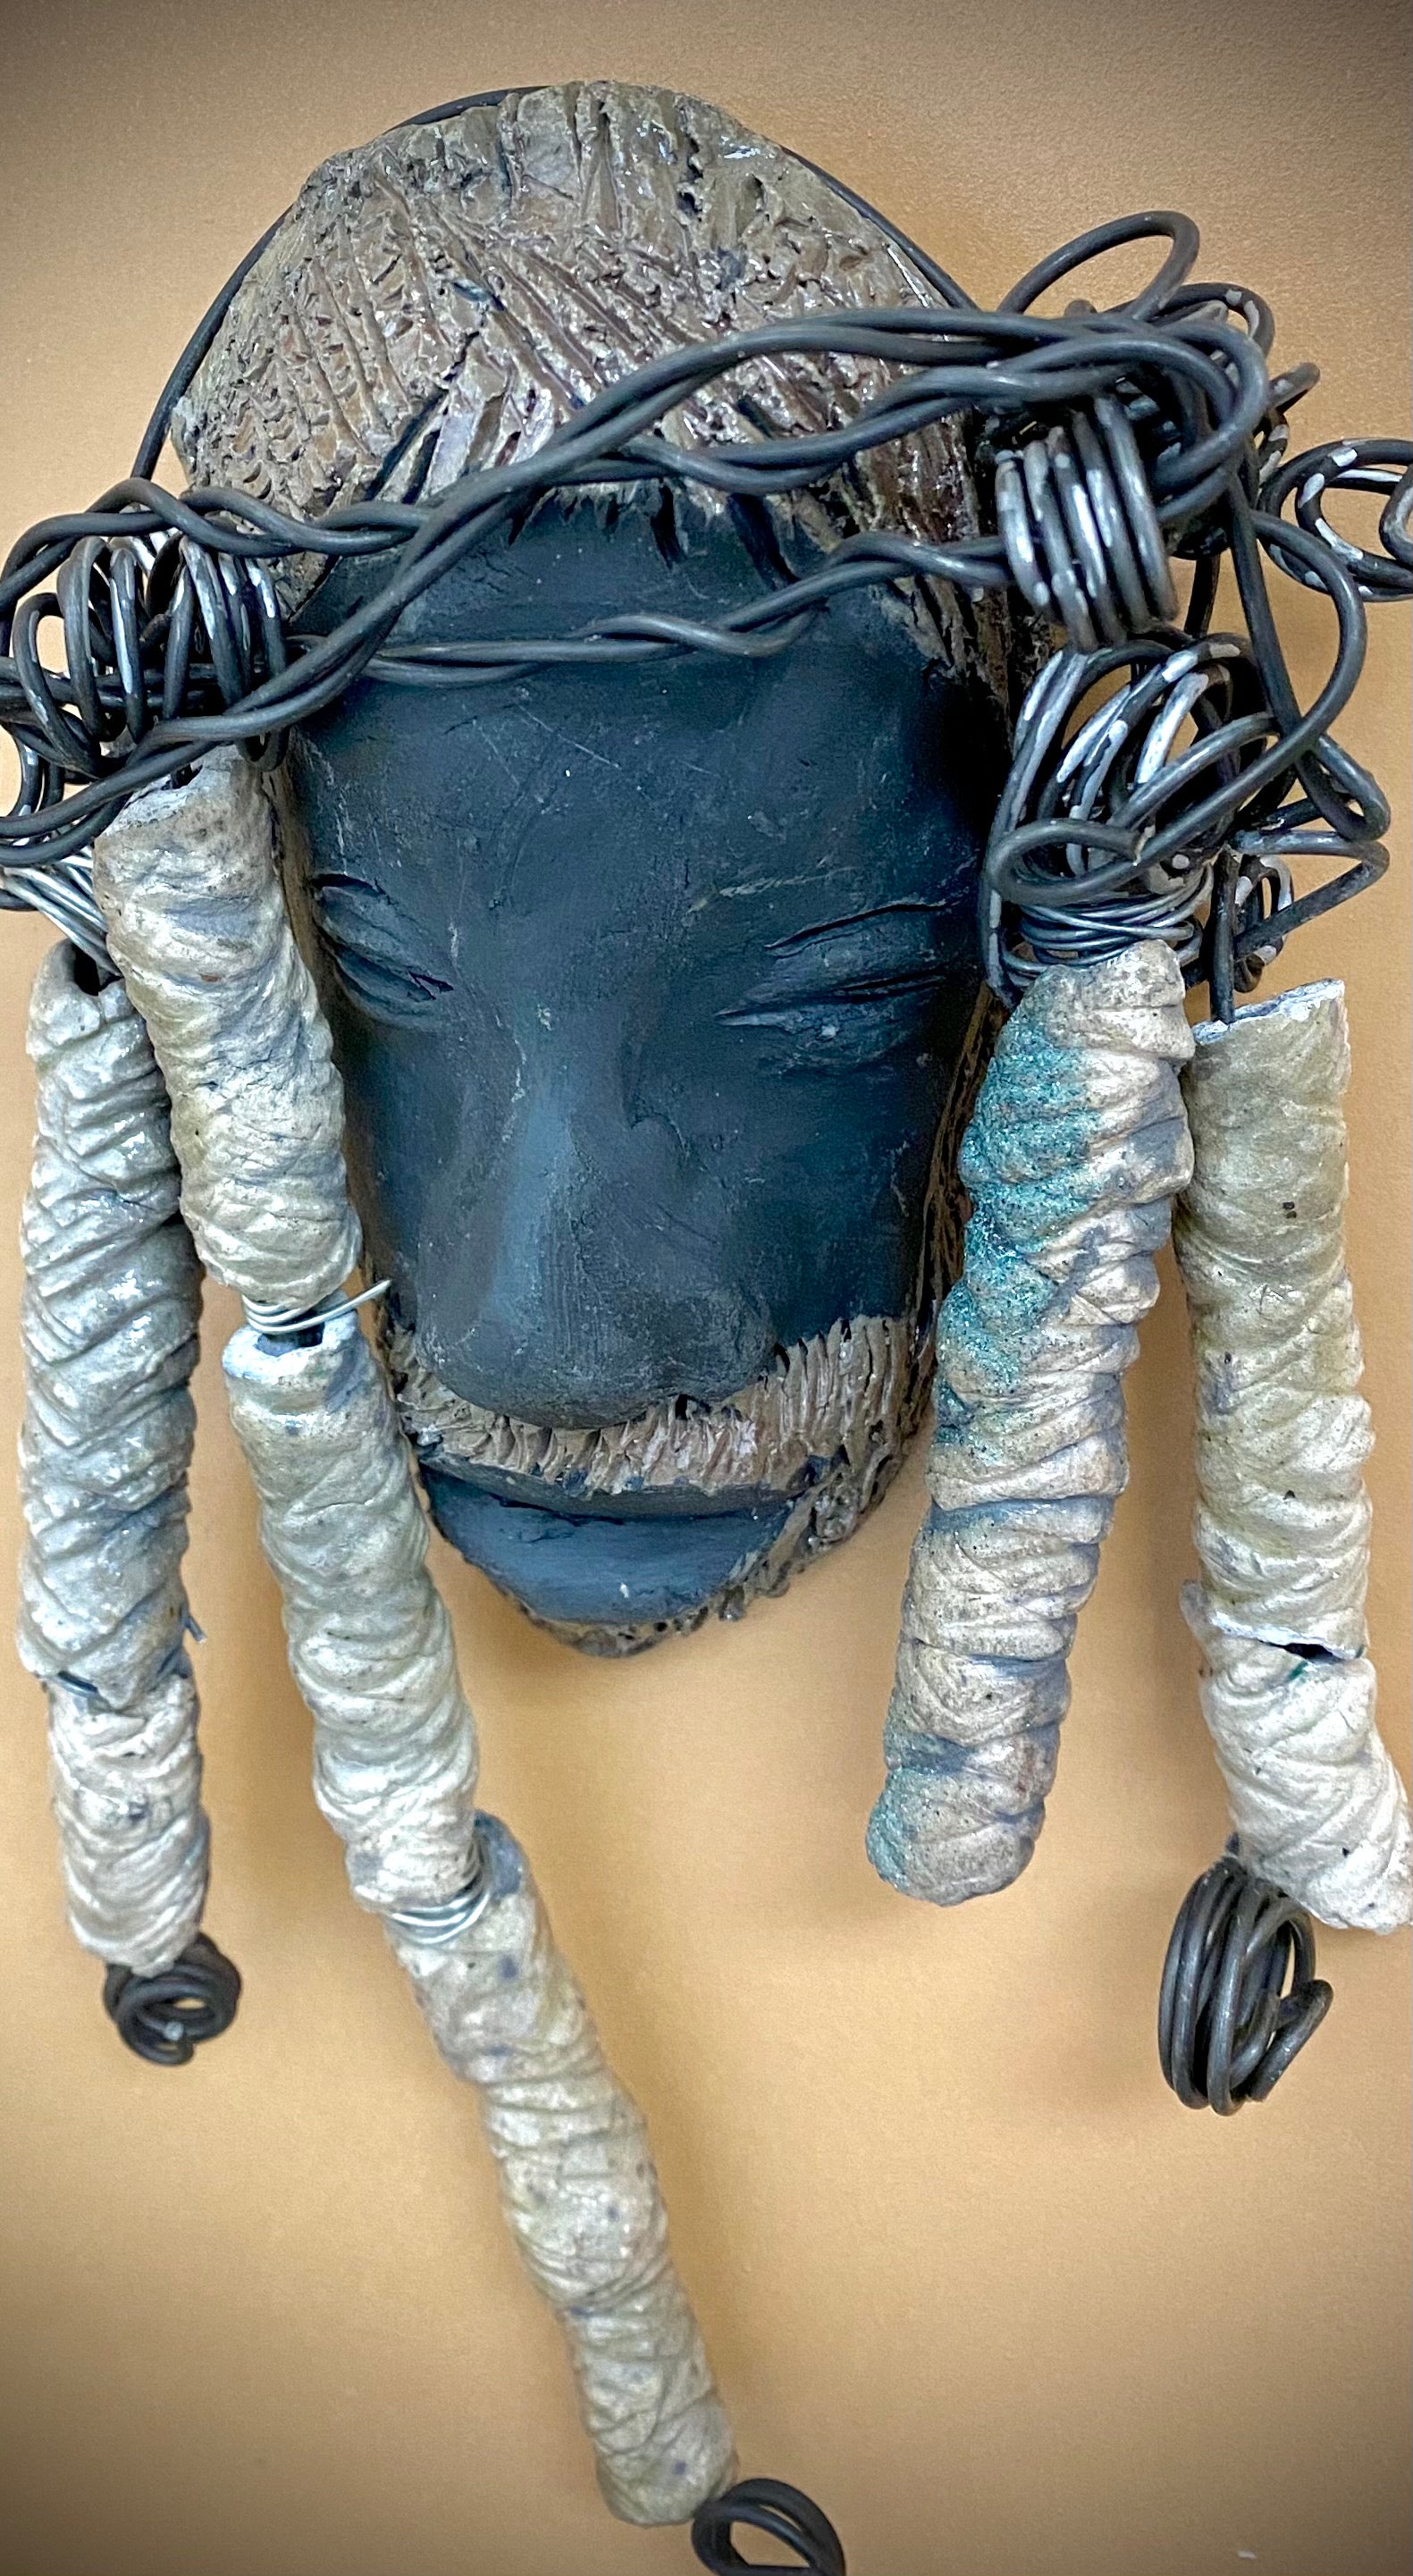 Meet Afumba! I started making art soon after seeing authentic African artwork at the Smithsonian Museum of African Art. I was in total awe. Afumba was inspired by my visit there.   Afumba is a wise and distinguished  bearded gentleman who has a smoky dark complexion. He is approximately 8" x 4" and weighs 10 ozs. Afumba has an aged hairstyle of 10 handmade textured off white clay dreadlocks along with twist of coiled 16 gauge wire.